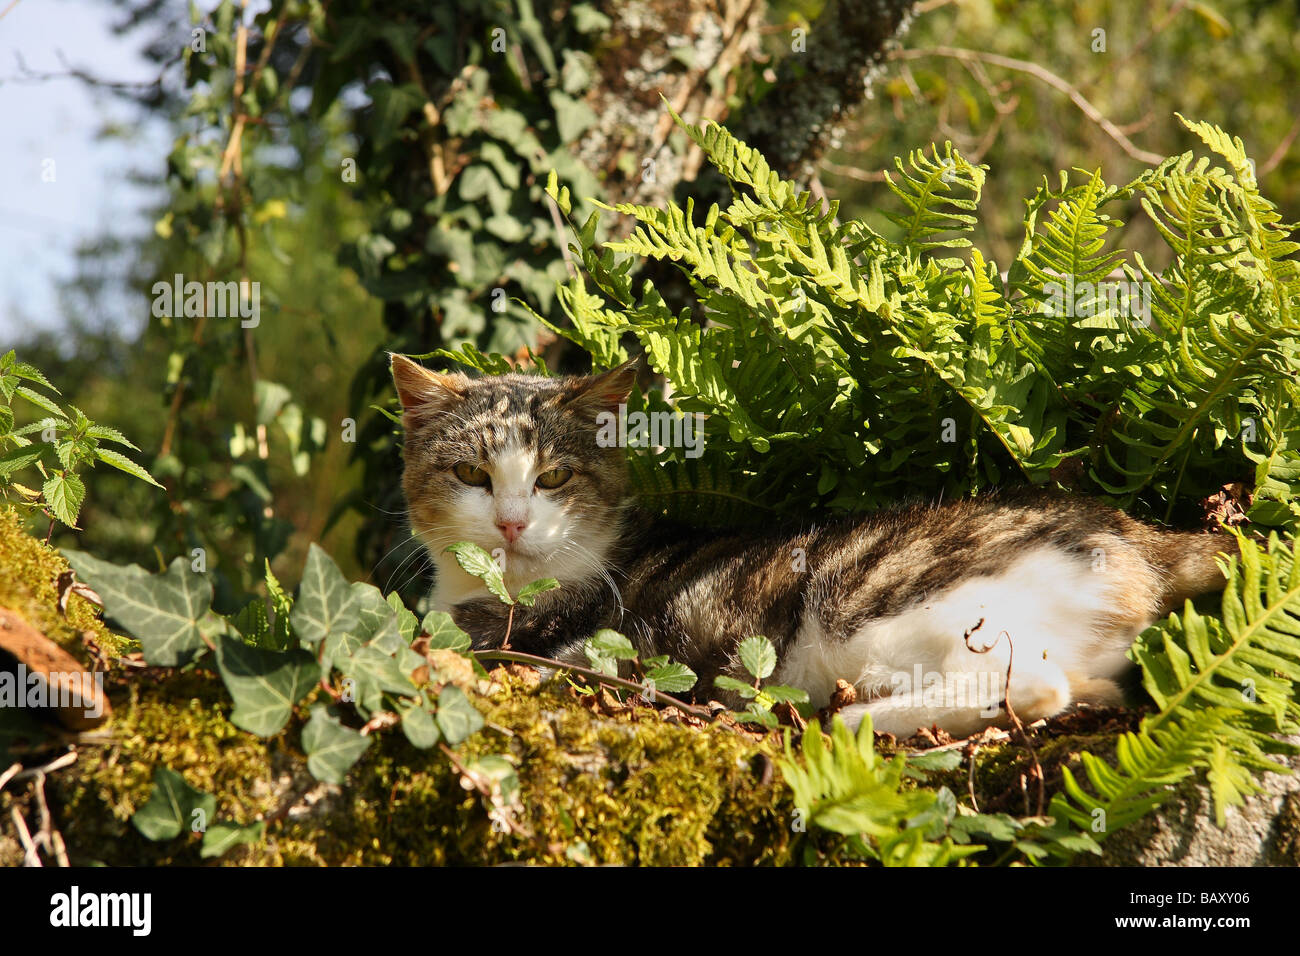 A tabby and white cat lying in dappled sun under ferns on an old stone wall Limousin France Stock Photo